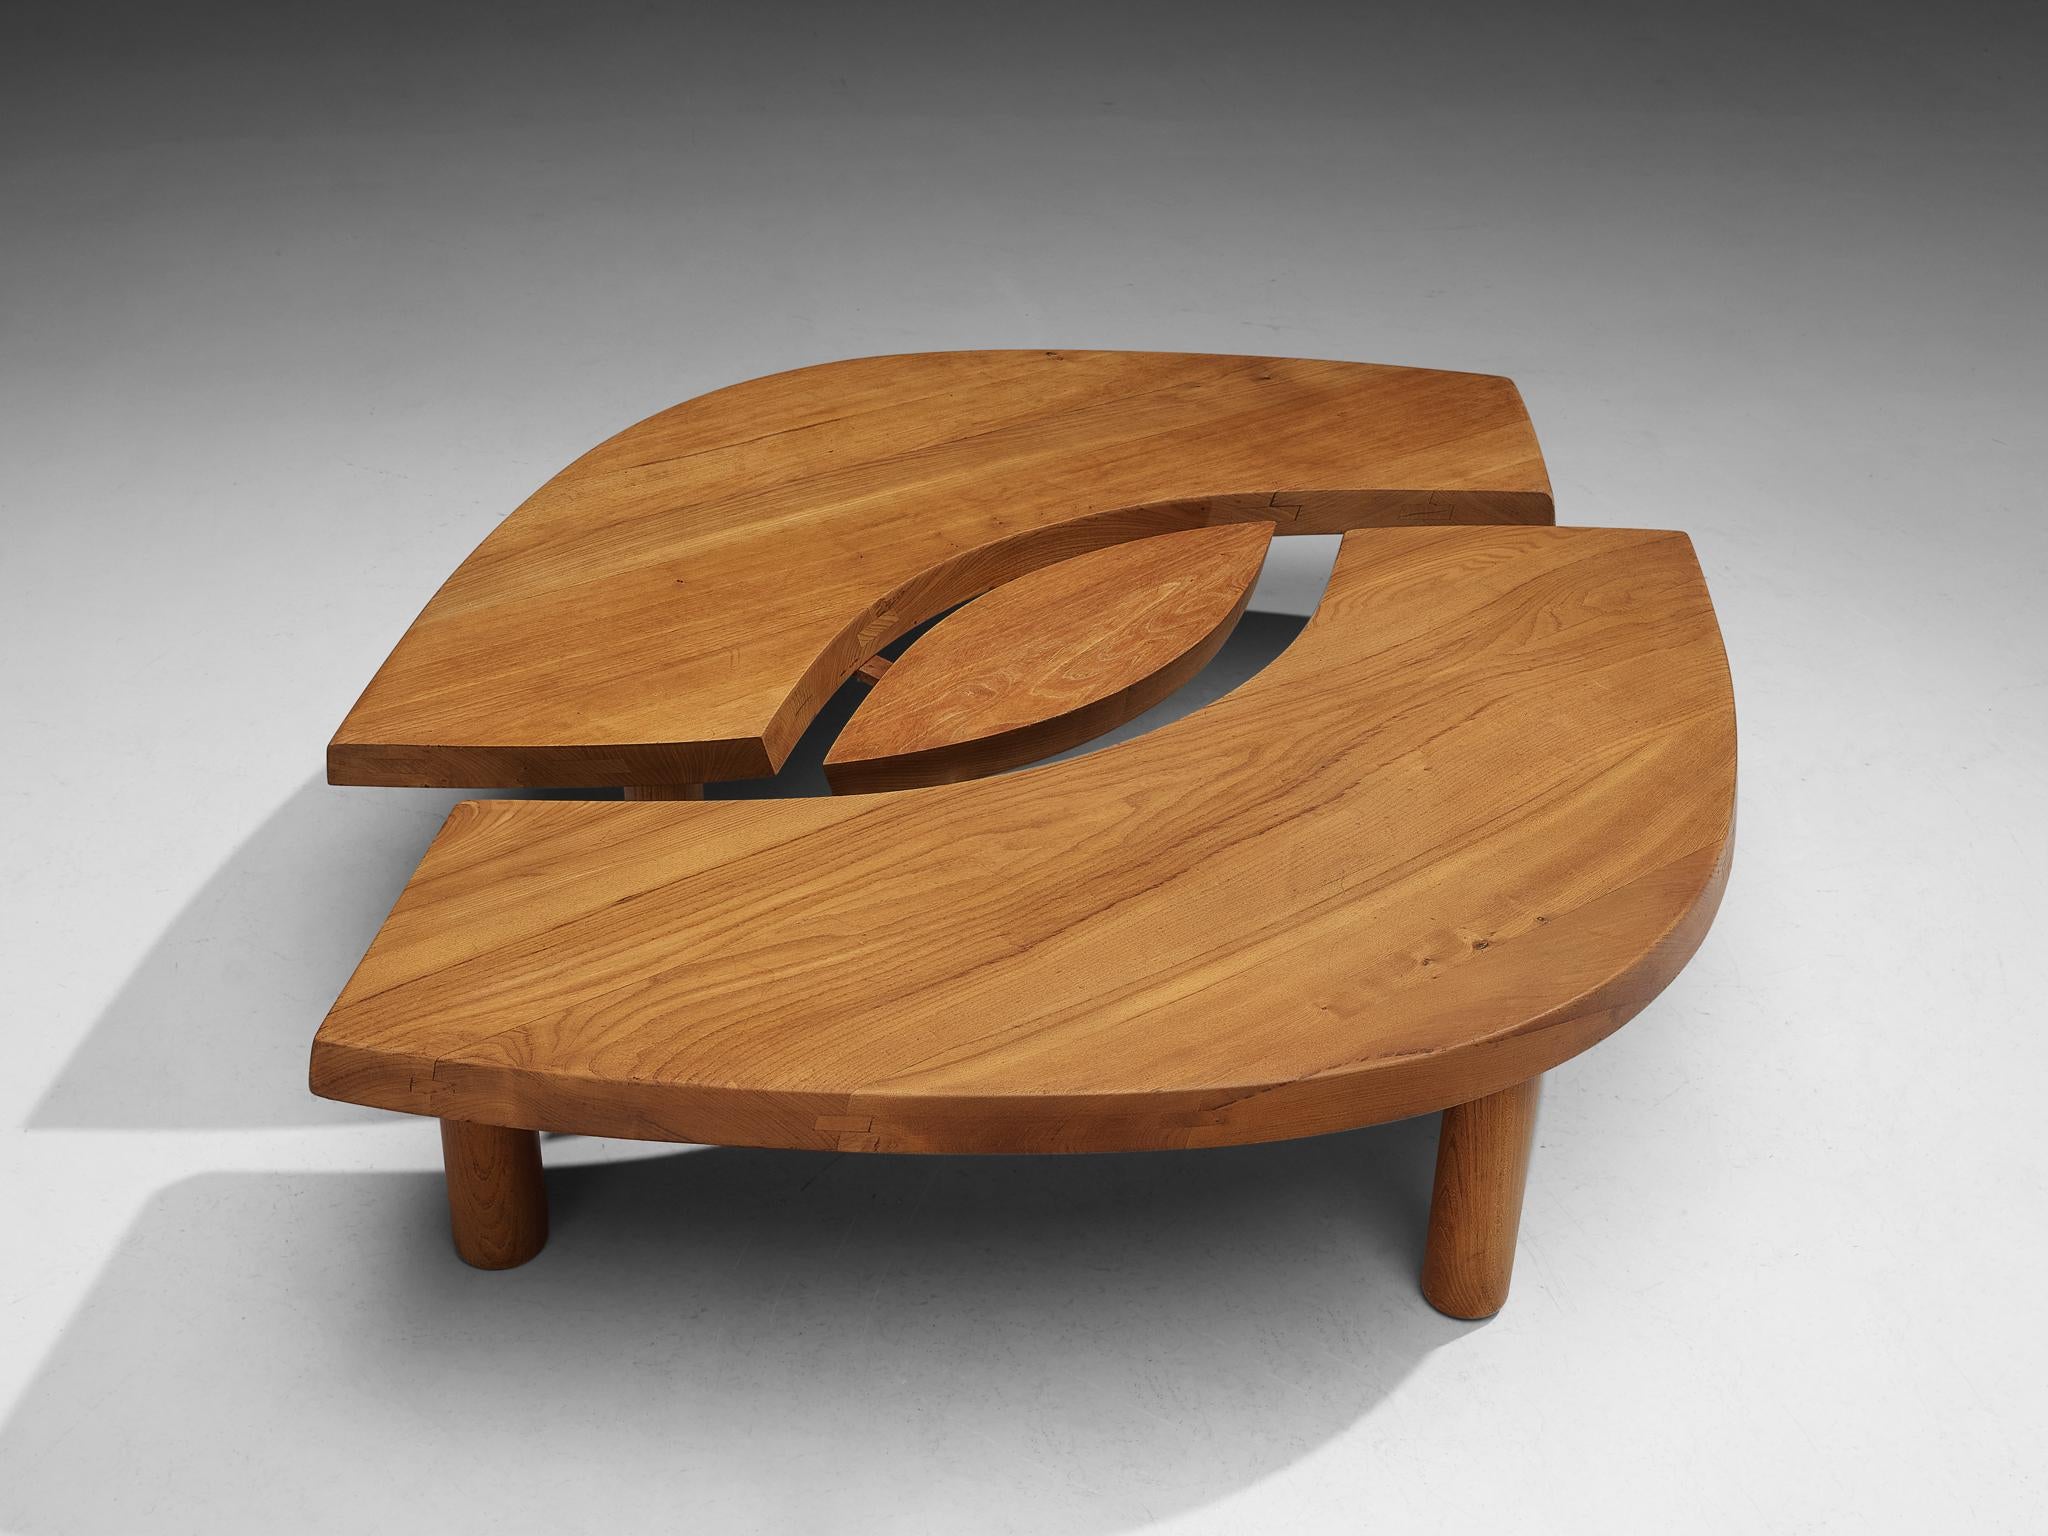 Pierre Chapo, coffee table, model T22C, elm, France, circa 1972

This beautiful eye-shaped cocktail table by the French designer Pierre Chapo (1927-1987) is made out of elm. It consists out of two arch-shaped tables and one oval middle. The table